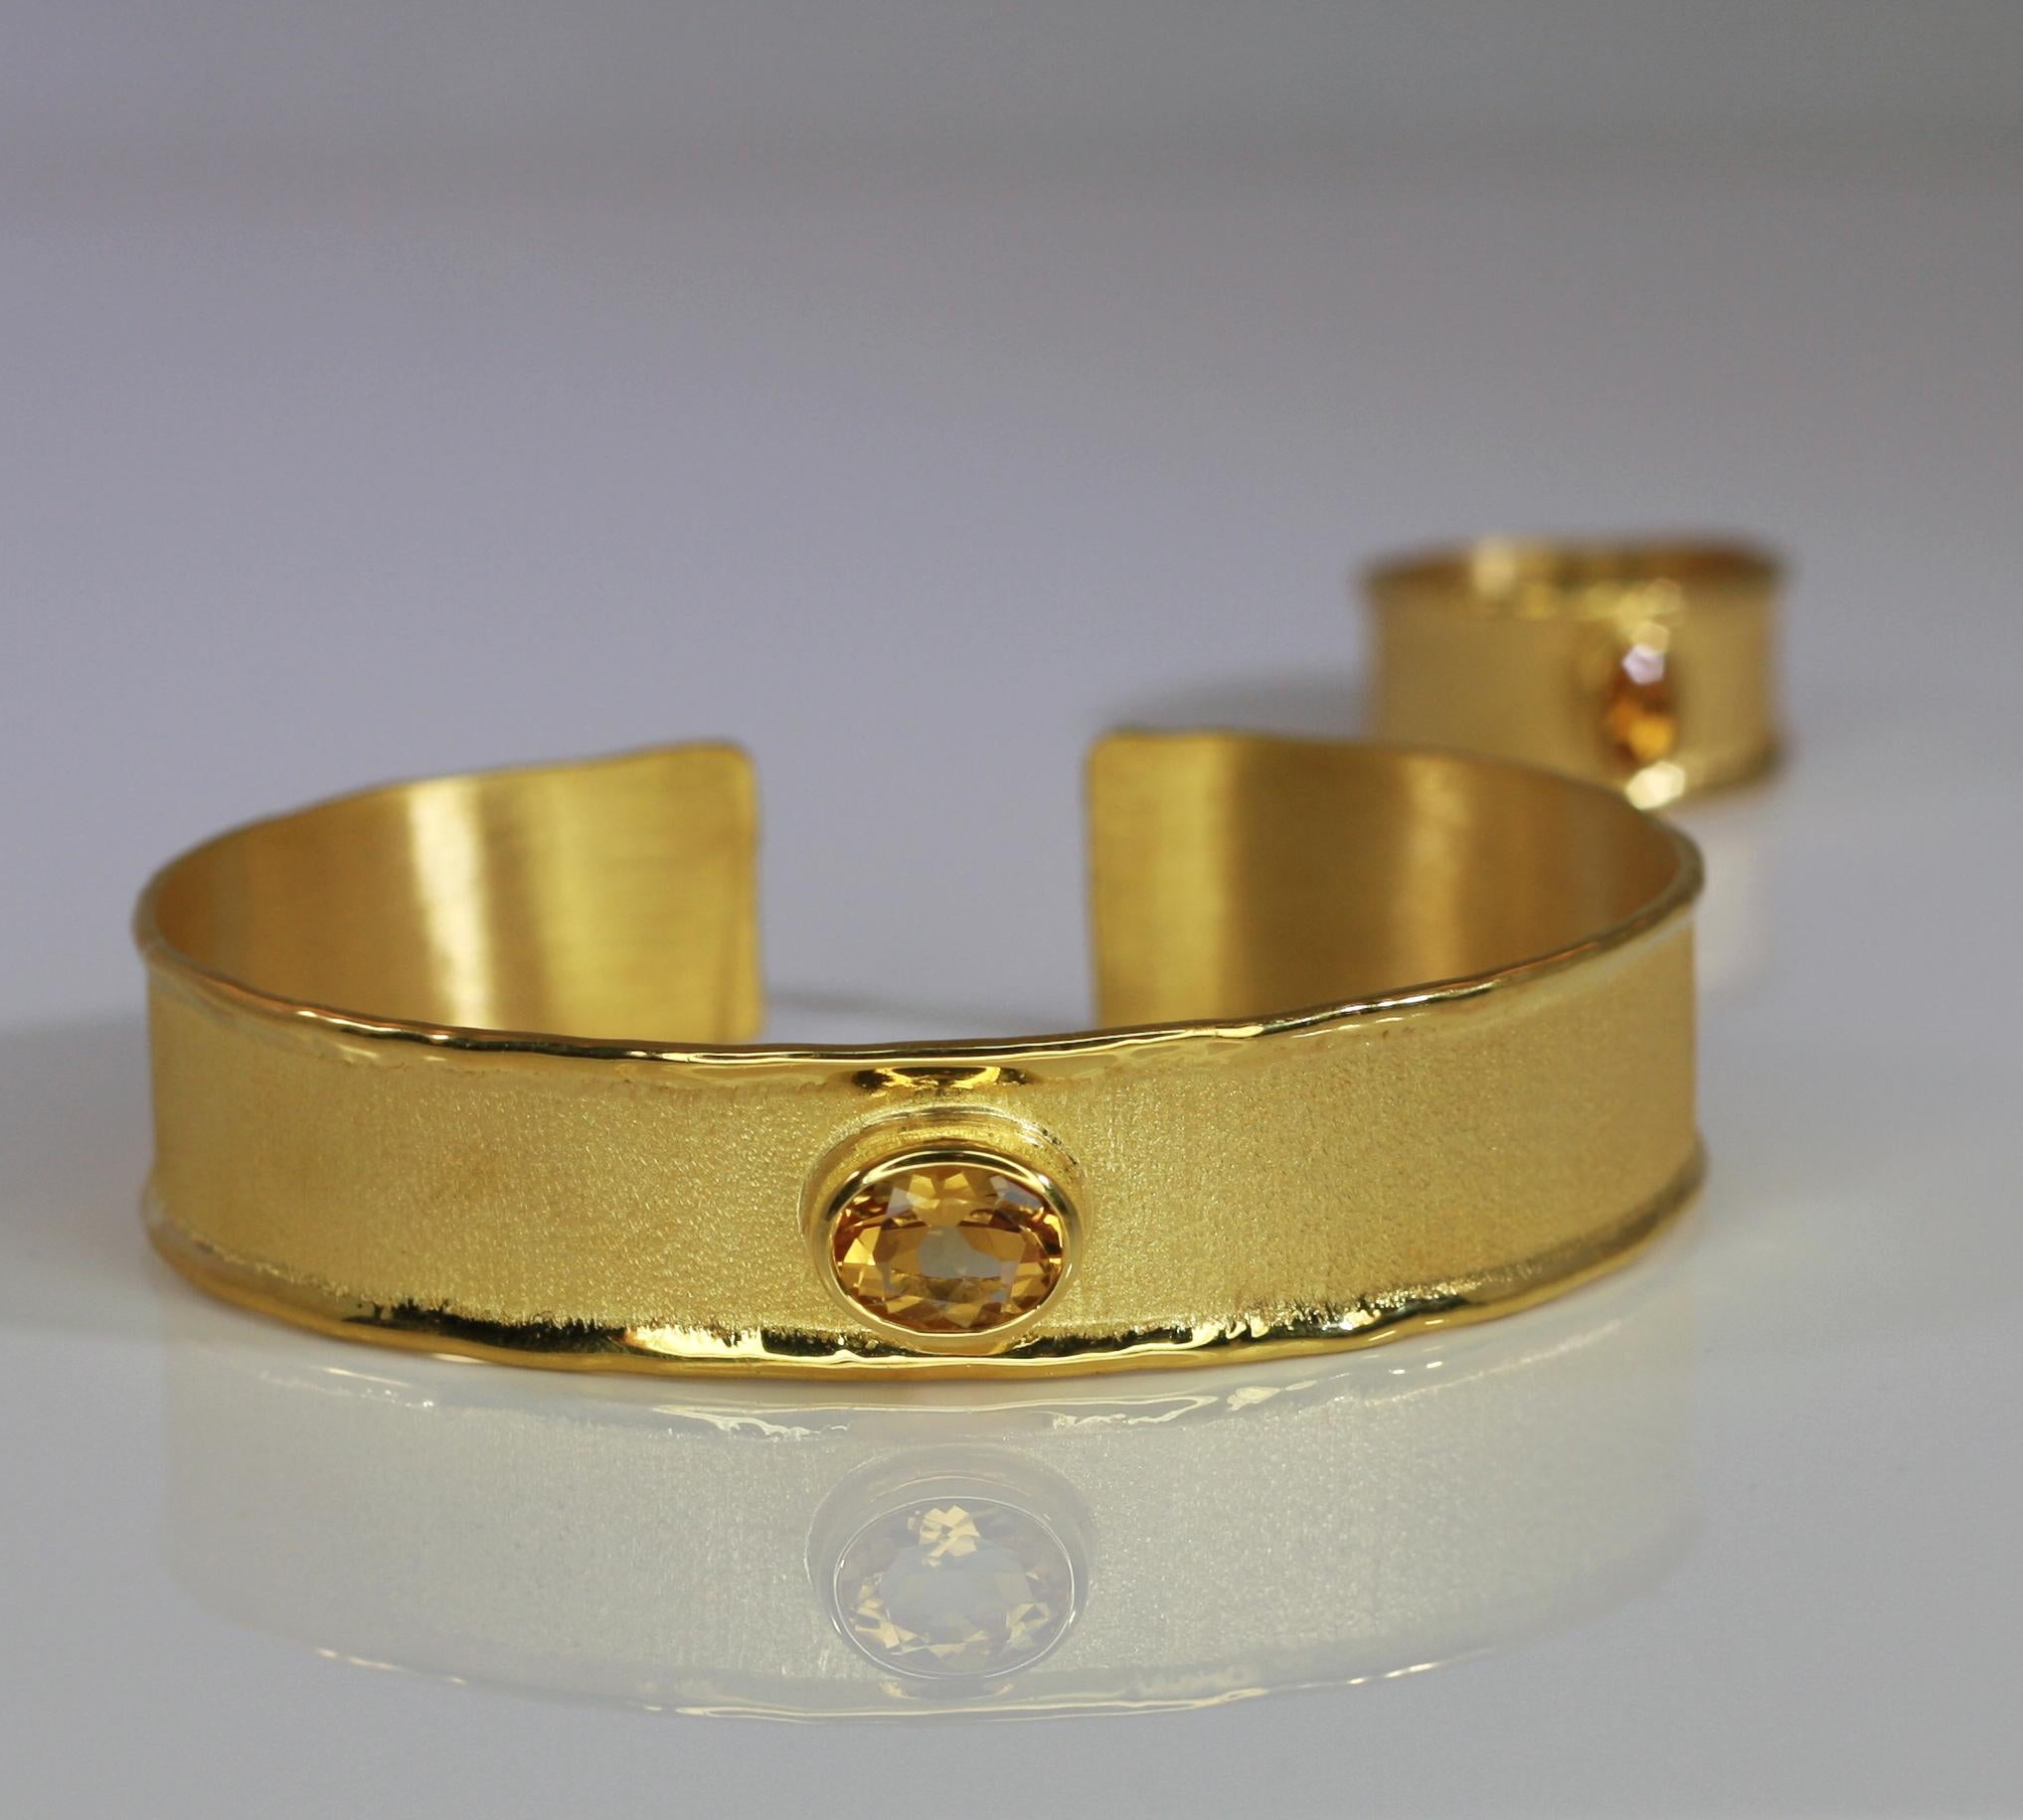 This bracelet from Yianni Creations is all handmade in Greece from 18 Karat Gold and set with 1.75 Carat Citrine. The unique look is created by using ancient techniques of craftsmanship - brushed texture and nature-inspired liquid edges. 
For a full